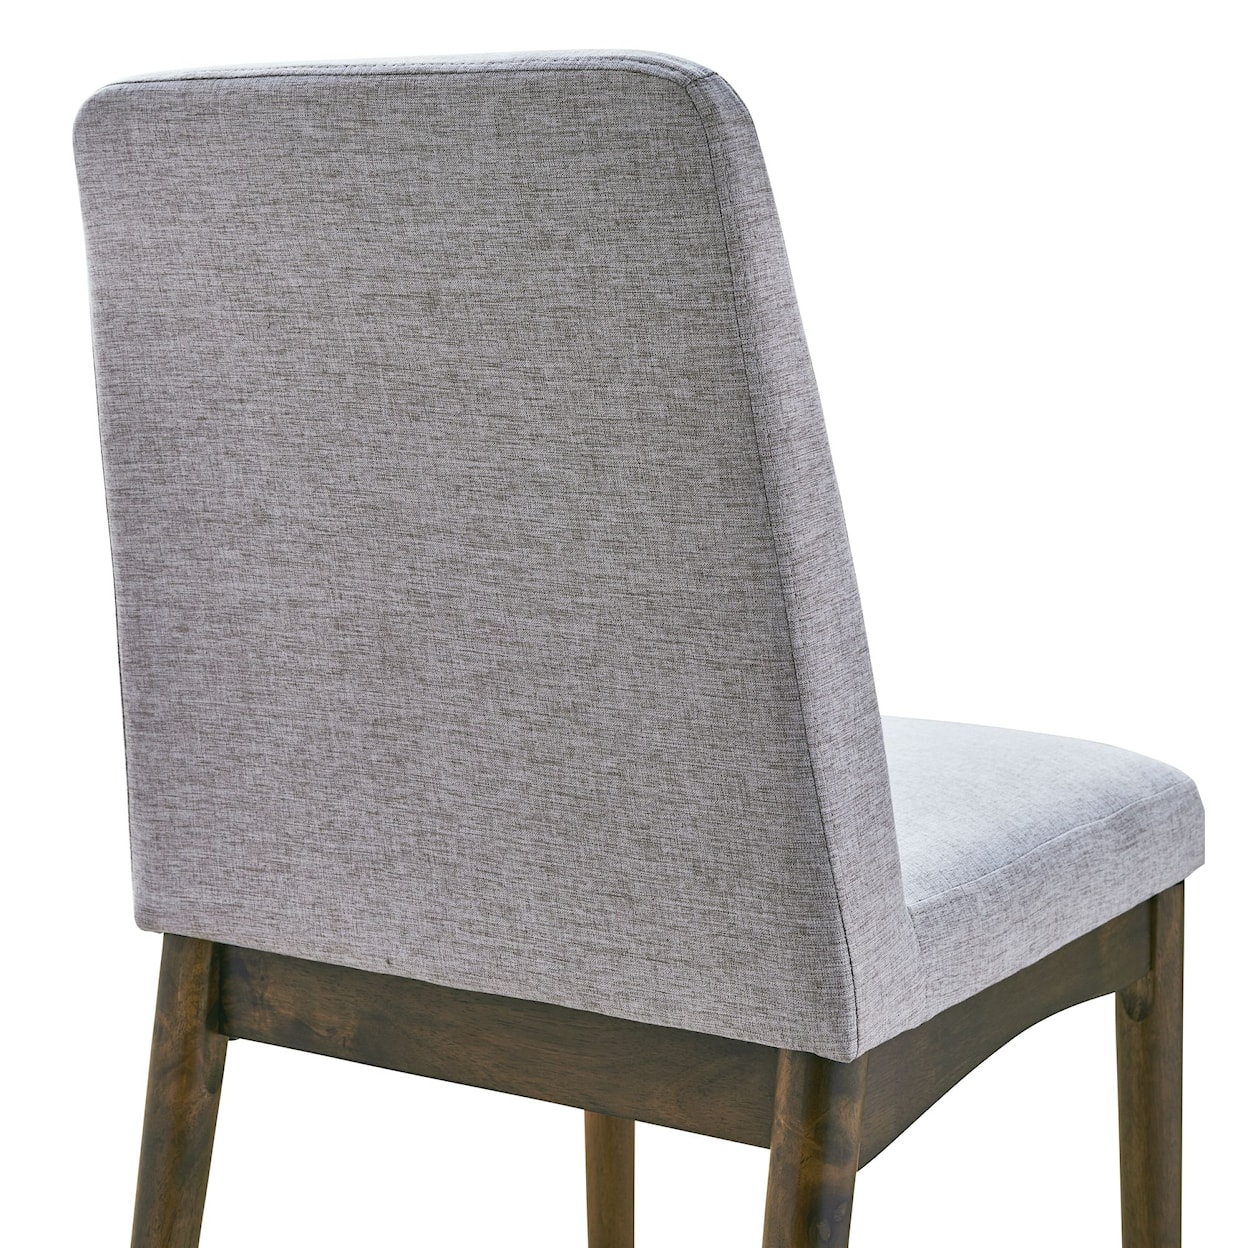 Elements Ginger Side Chair